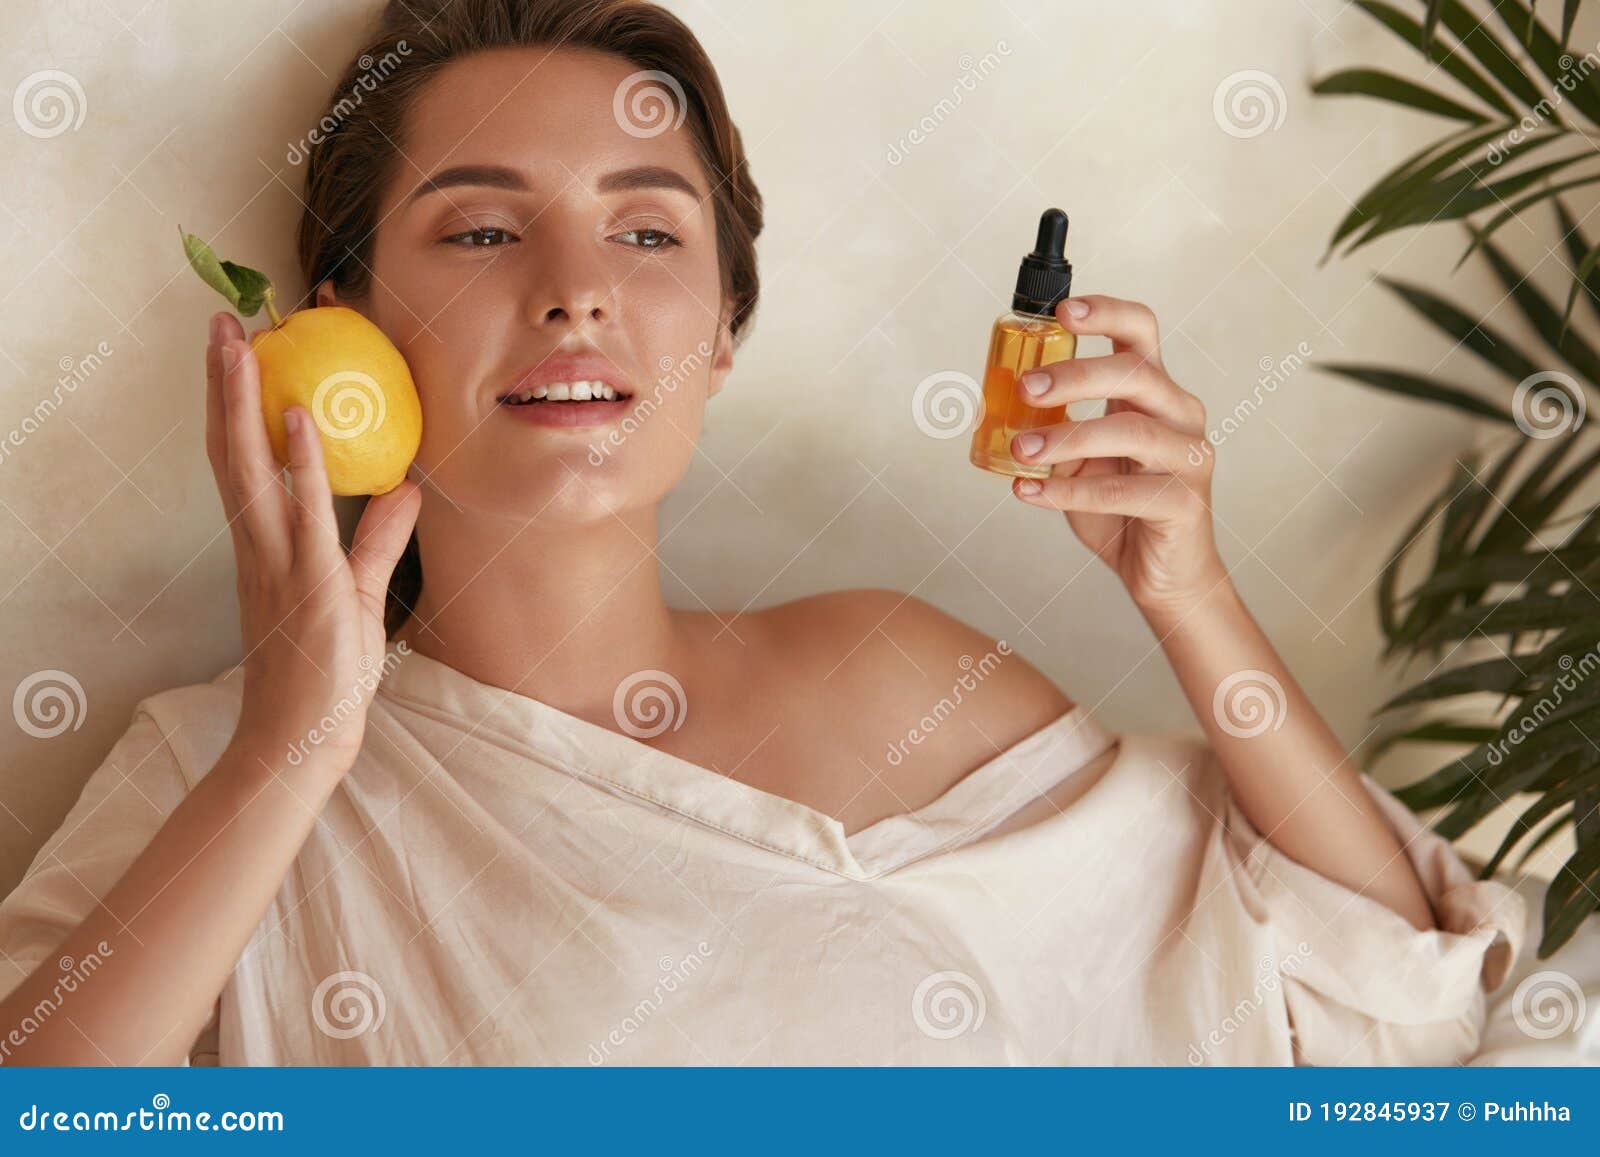 skin care. beauty portrait of woman holding lemon and bottle near face. natural cosmetic product for hydrated derma.